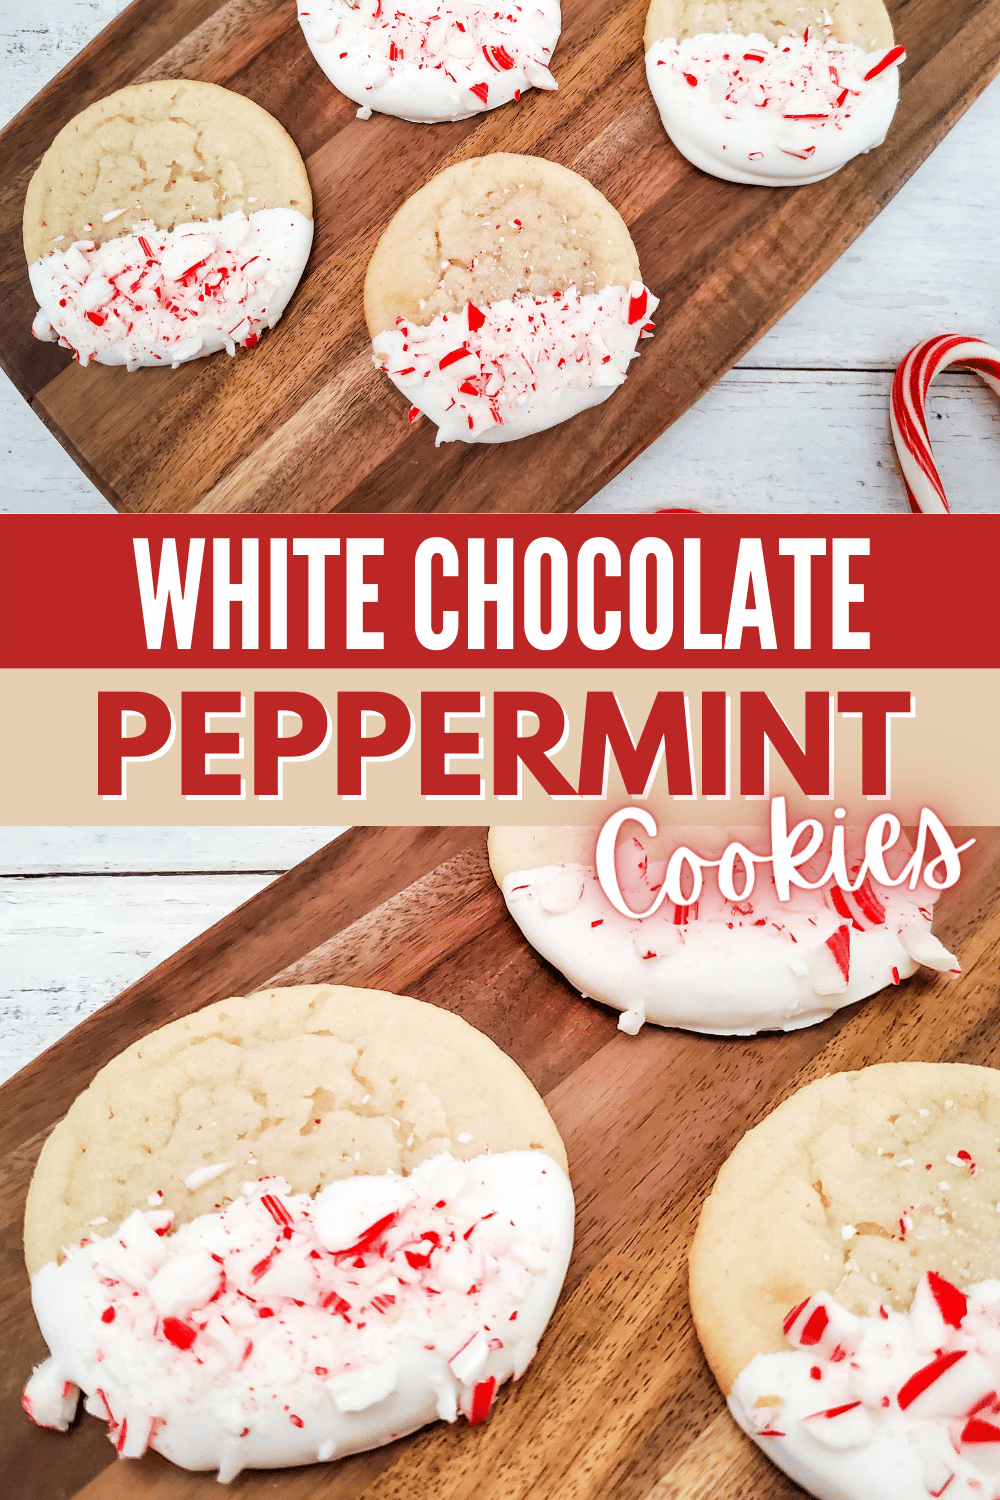 These White Chocolate Peppermint Cookies are perfect for the holidays! They're dipped in white chocolate and coated in crushed peppermints. #whitechocolatepeppermintcookies #christmascookies #peppermintcookies #whitechocolatecookies via @wondermomwannab